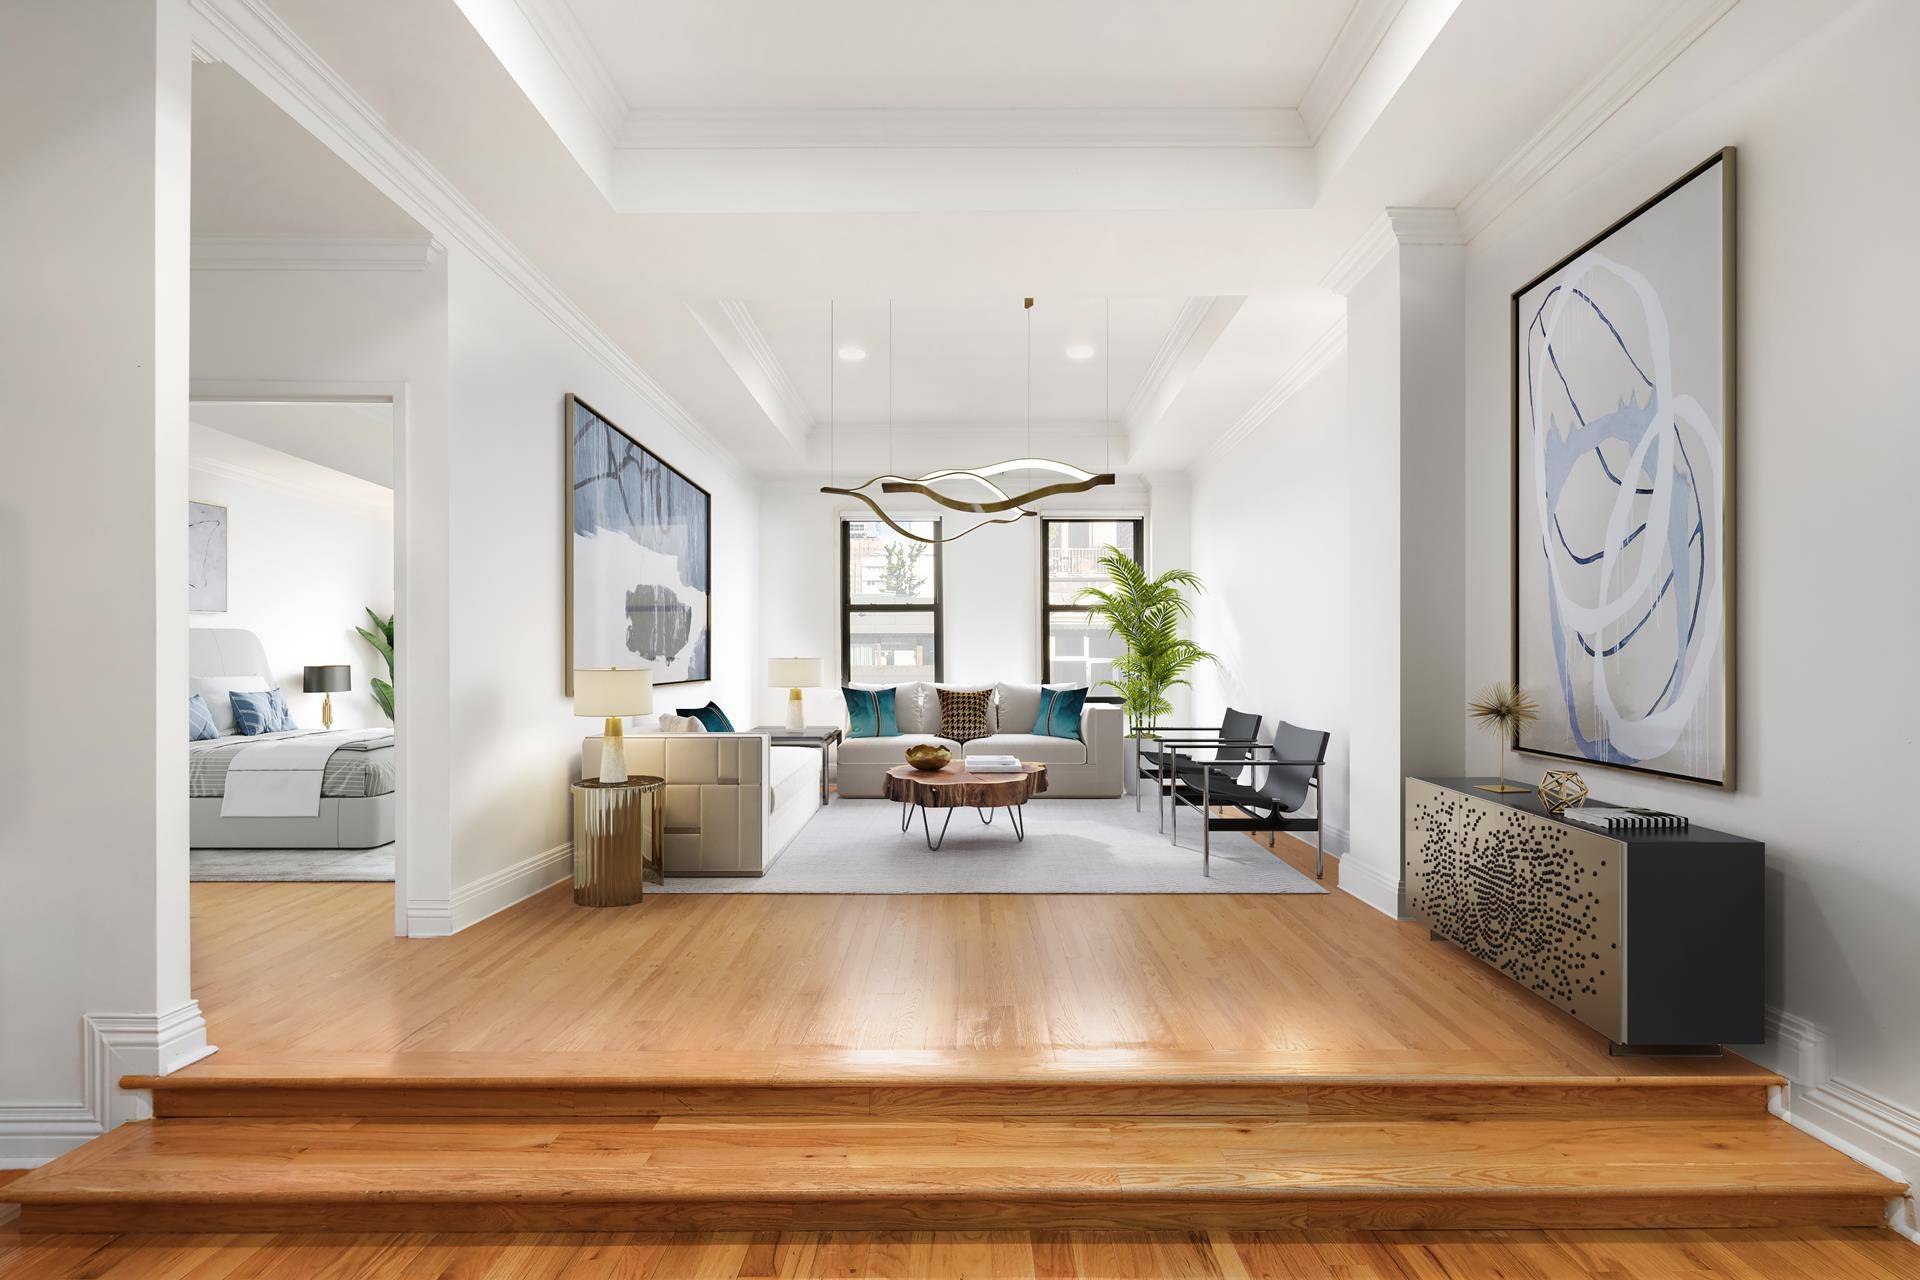 Loft is virtually staged to illustrate its potential.